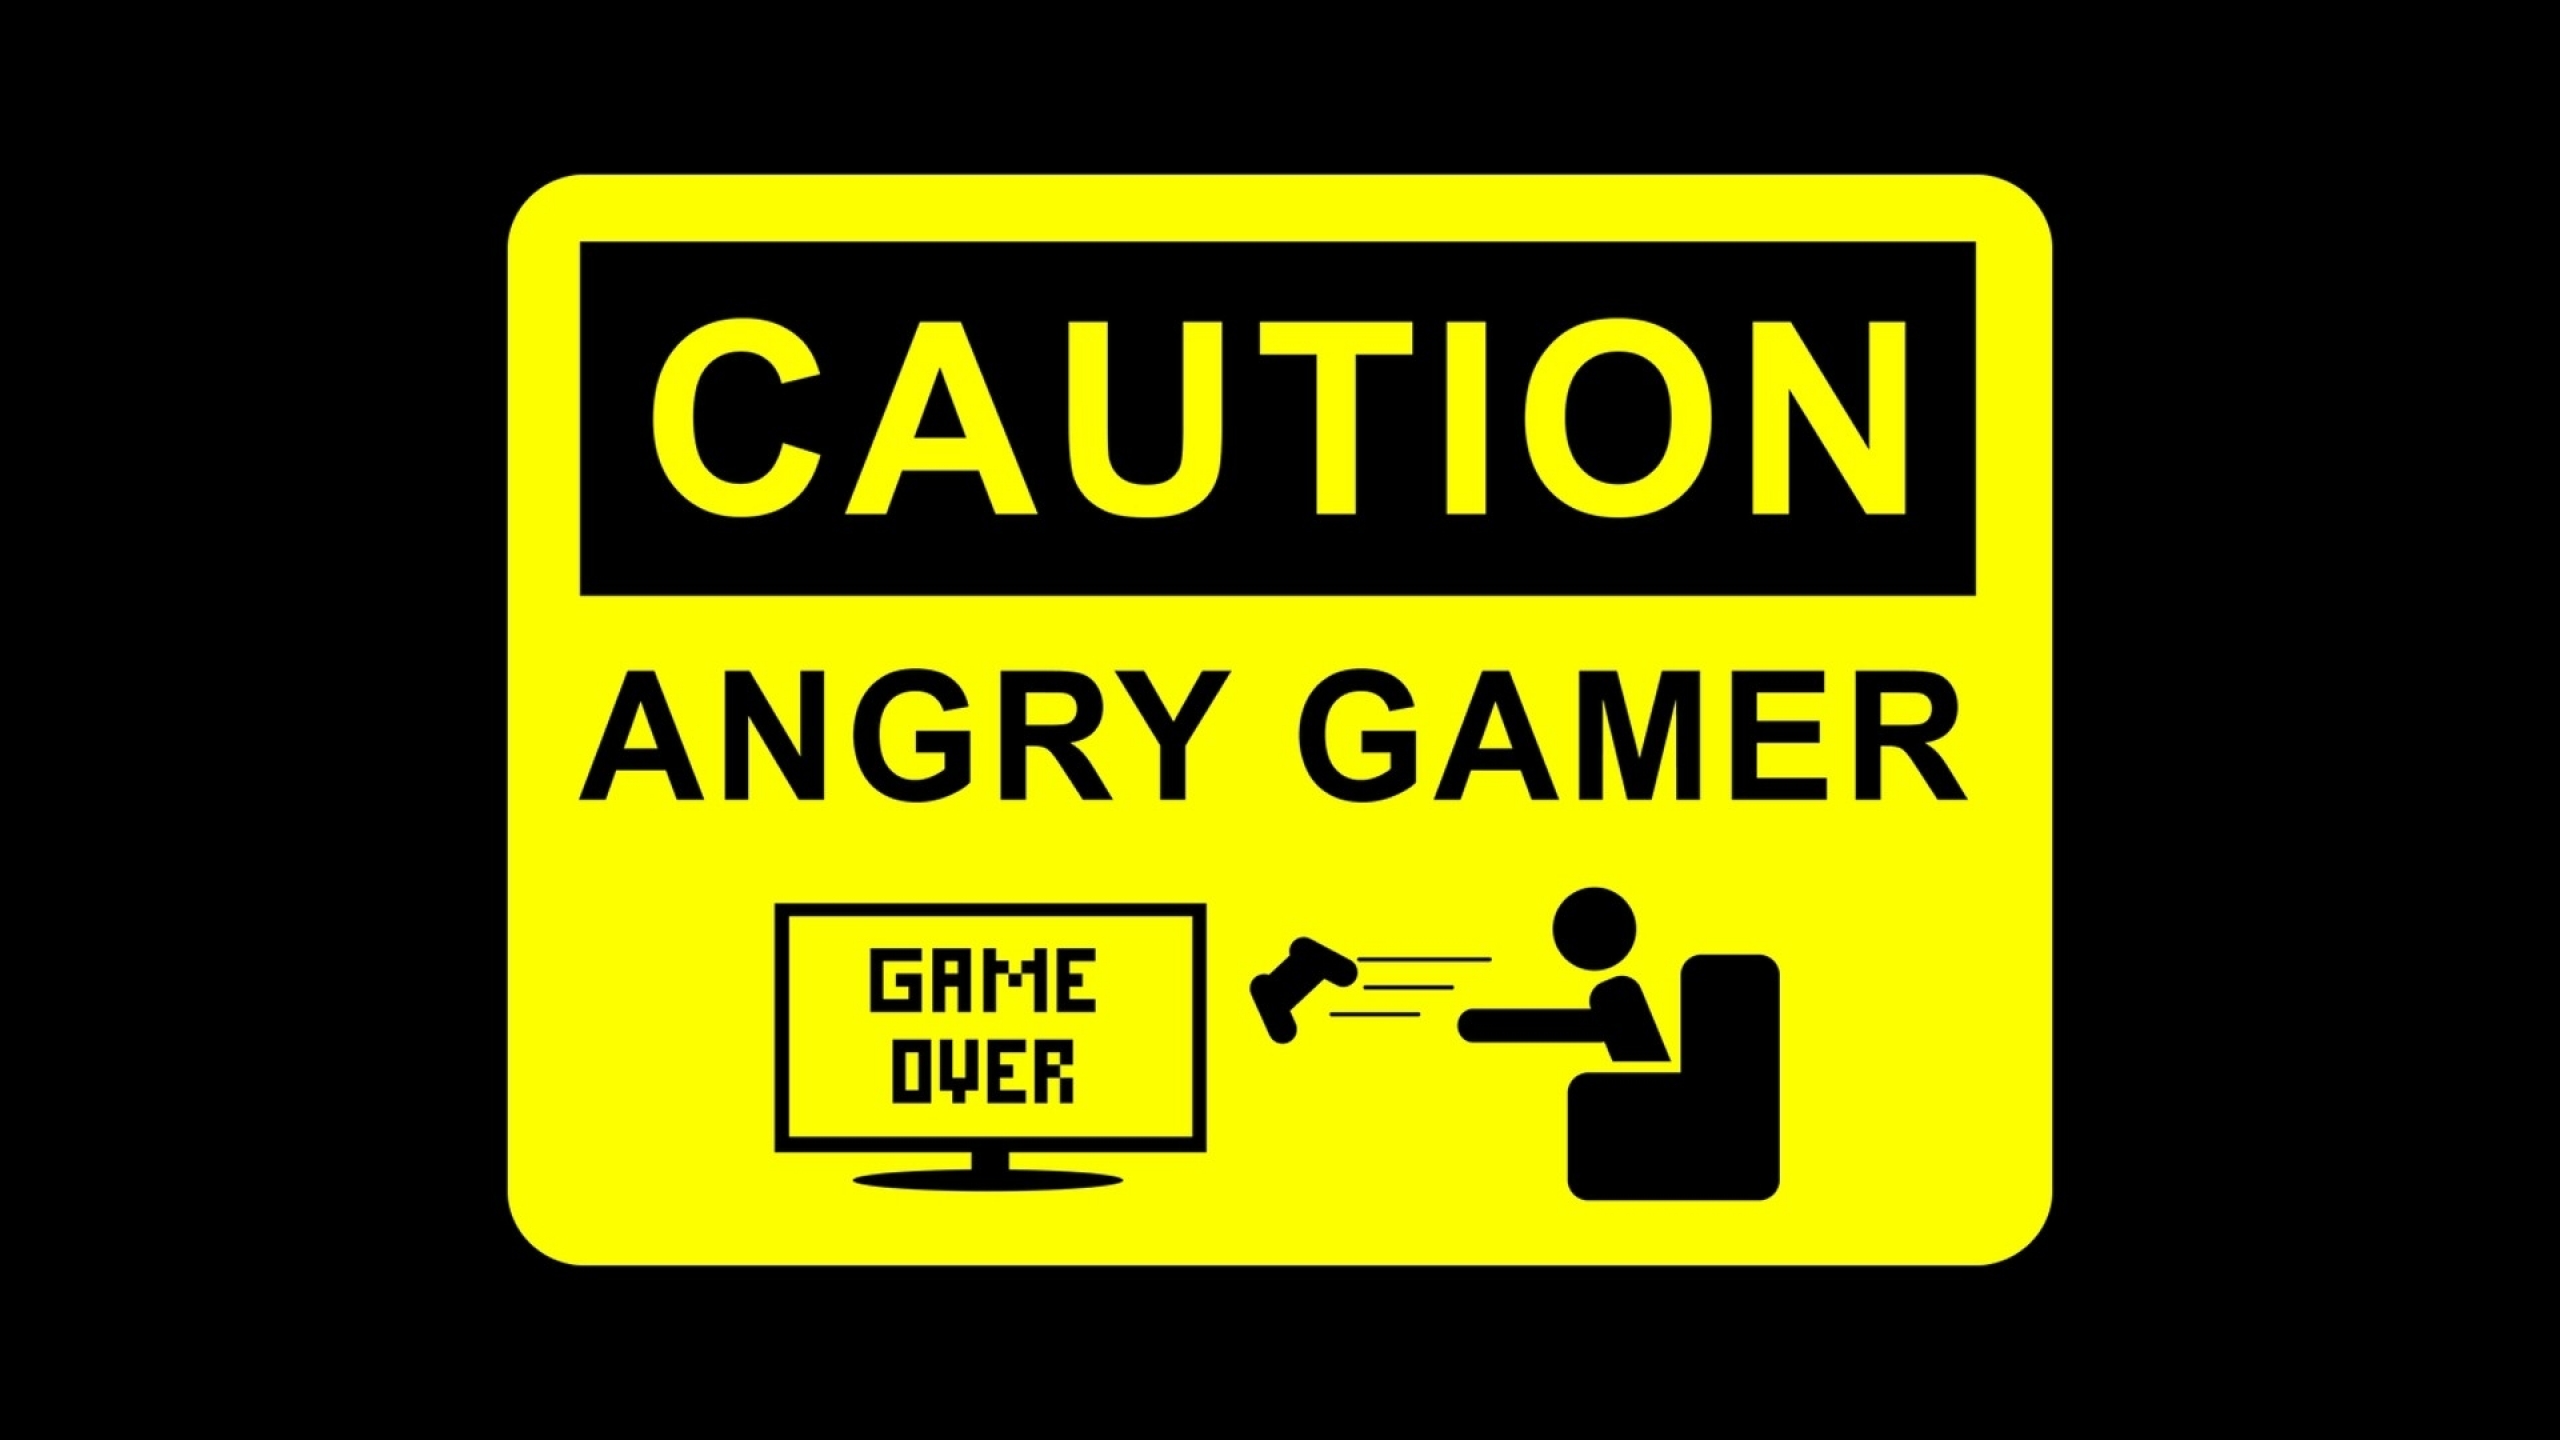 Game Over Angry Caution Black Background Gamer